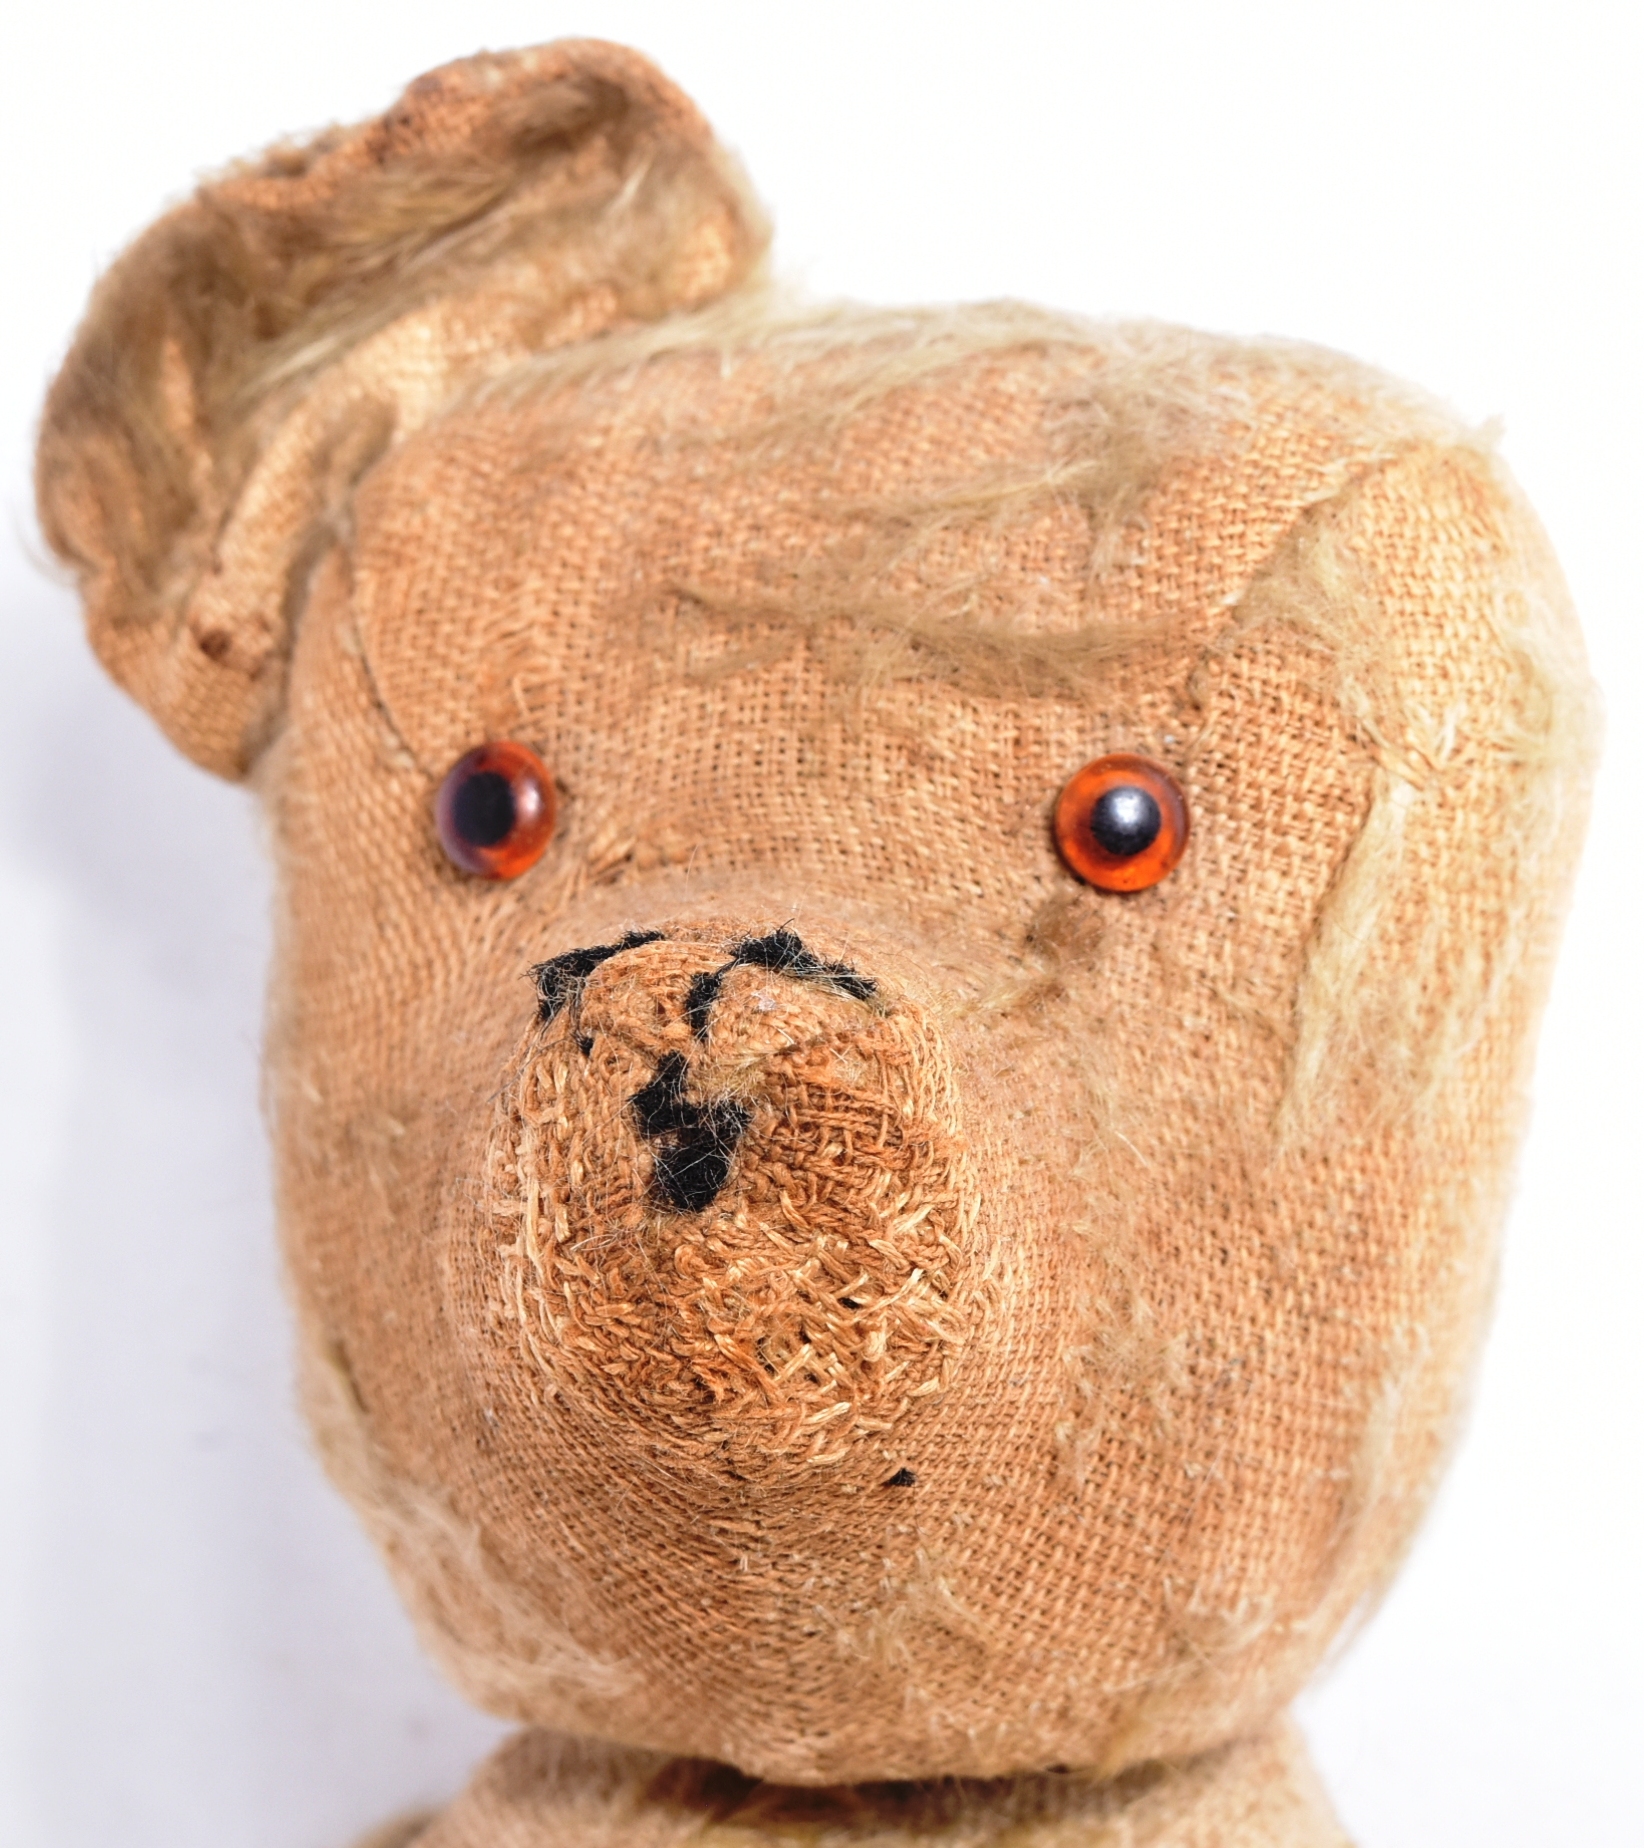 EARLY 20TH CENTURY TEDDY BEAR WITH GROWLER - Image 2 of 5